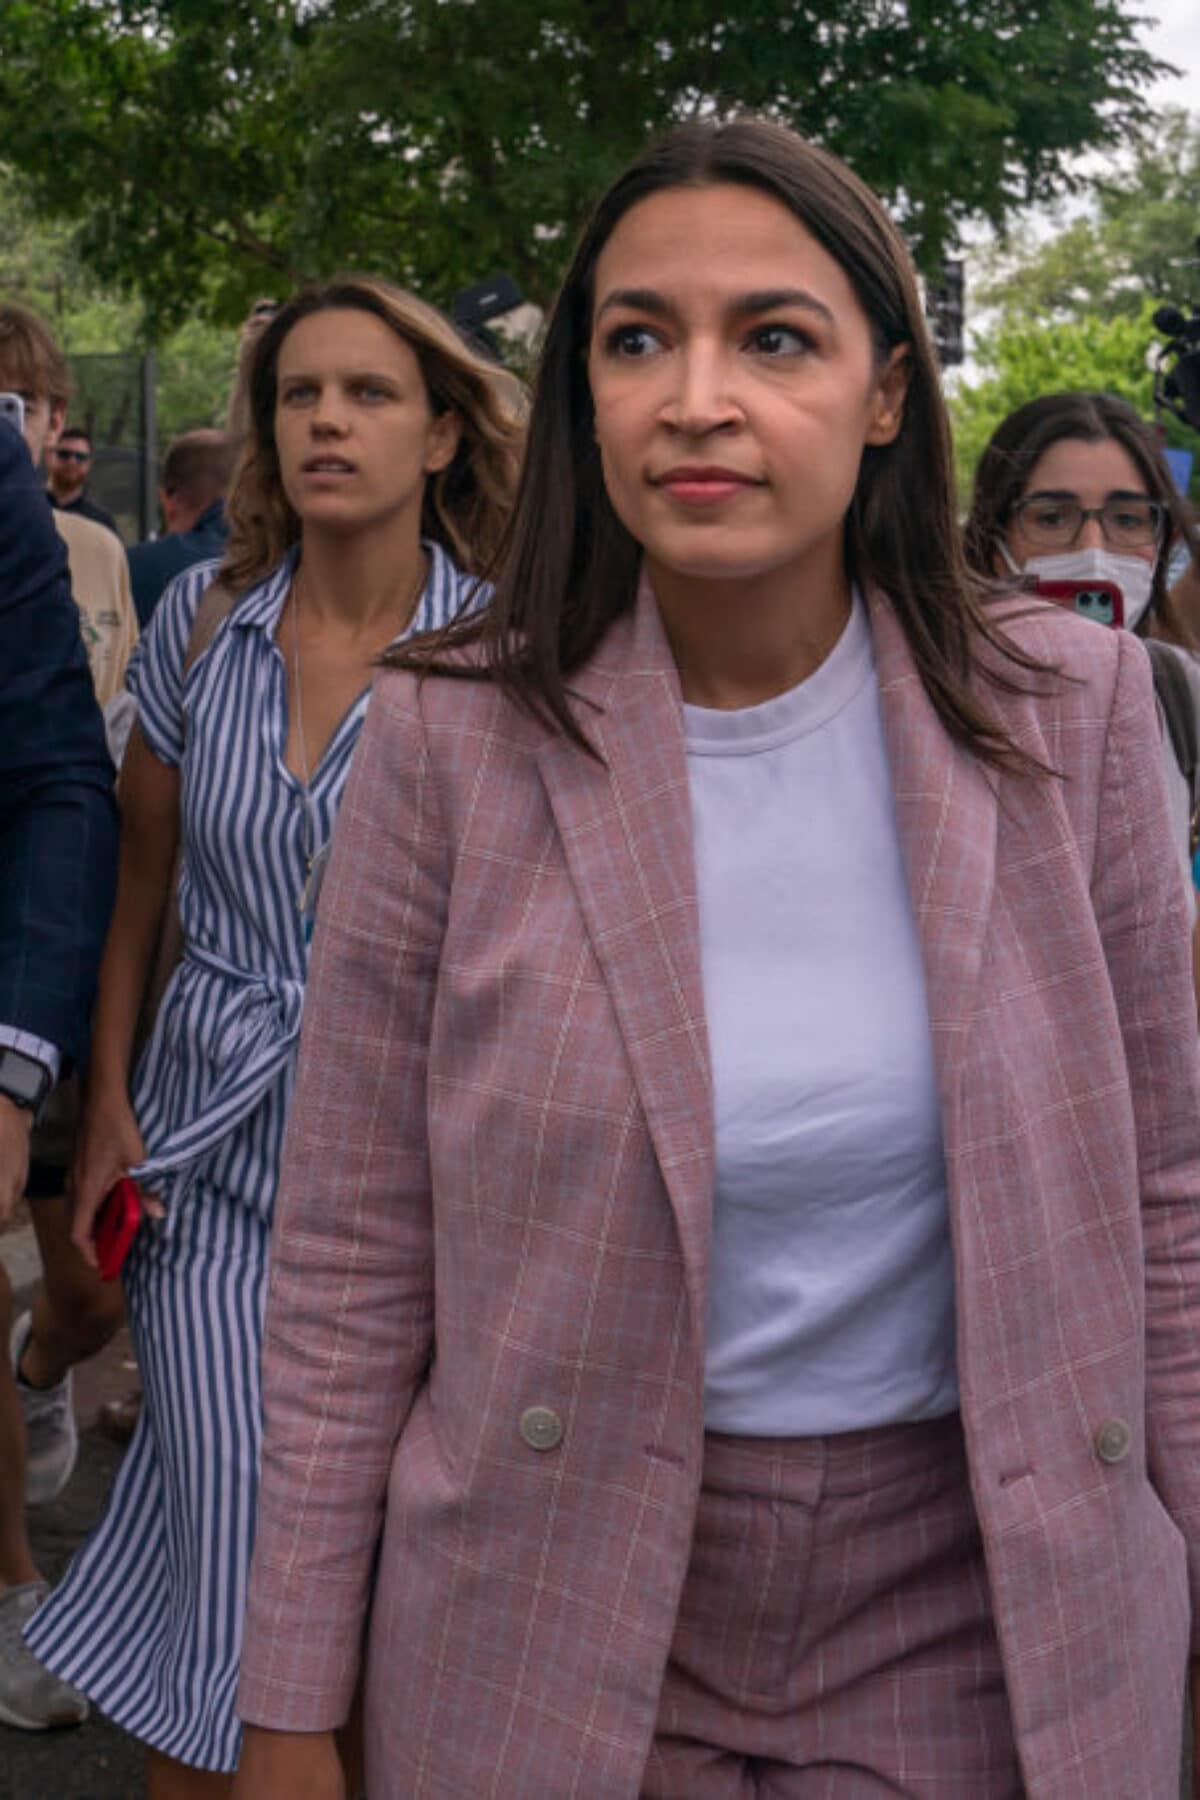 WASHINGTON, DC - JUNE 24: Rep. Alexandria Ocasio-Cortez (D-NY) leaves after speaking to abortion-rights activists in front of the U.S. Supreme Court after the Court announced a ruling in the Dobbs v Jackson Women's Health Organization case on June 24, 2022 in Washington, DC. The Court's decision in the Dobbs v Jackson Women's Health case overturns the landmark 50-year-old Roe v Wade case, removing a federal right to an abortion. (Photo by Nathan Howard/Getty Images)